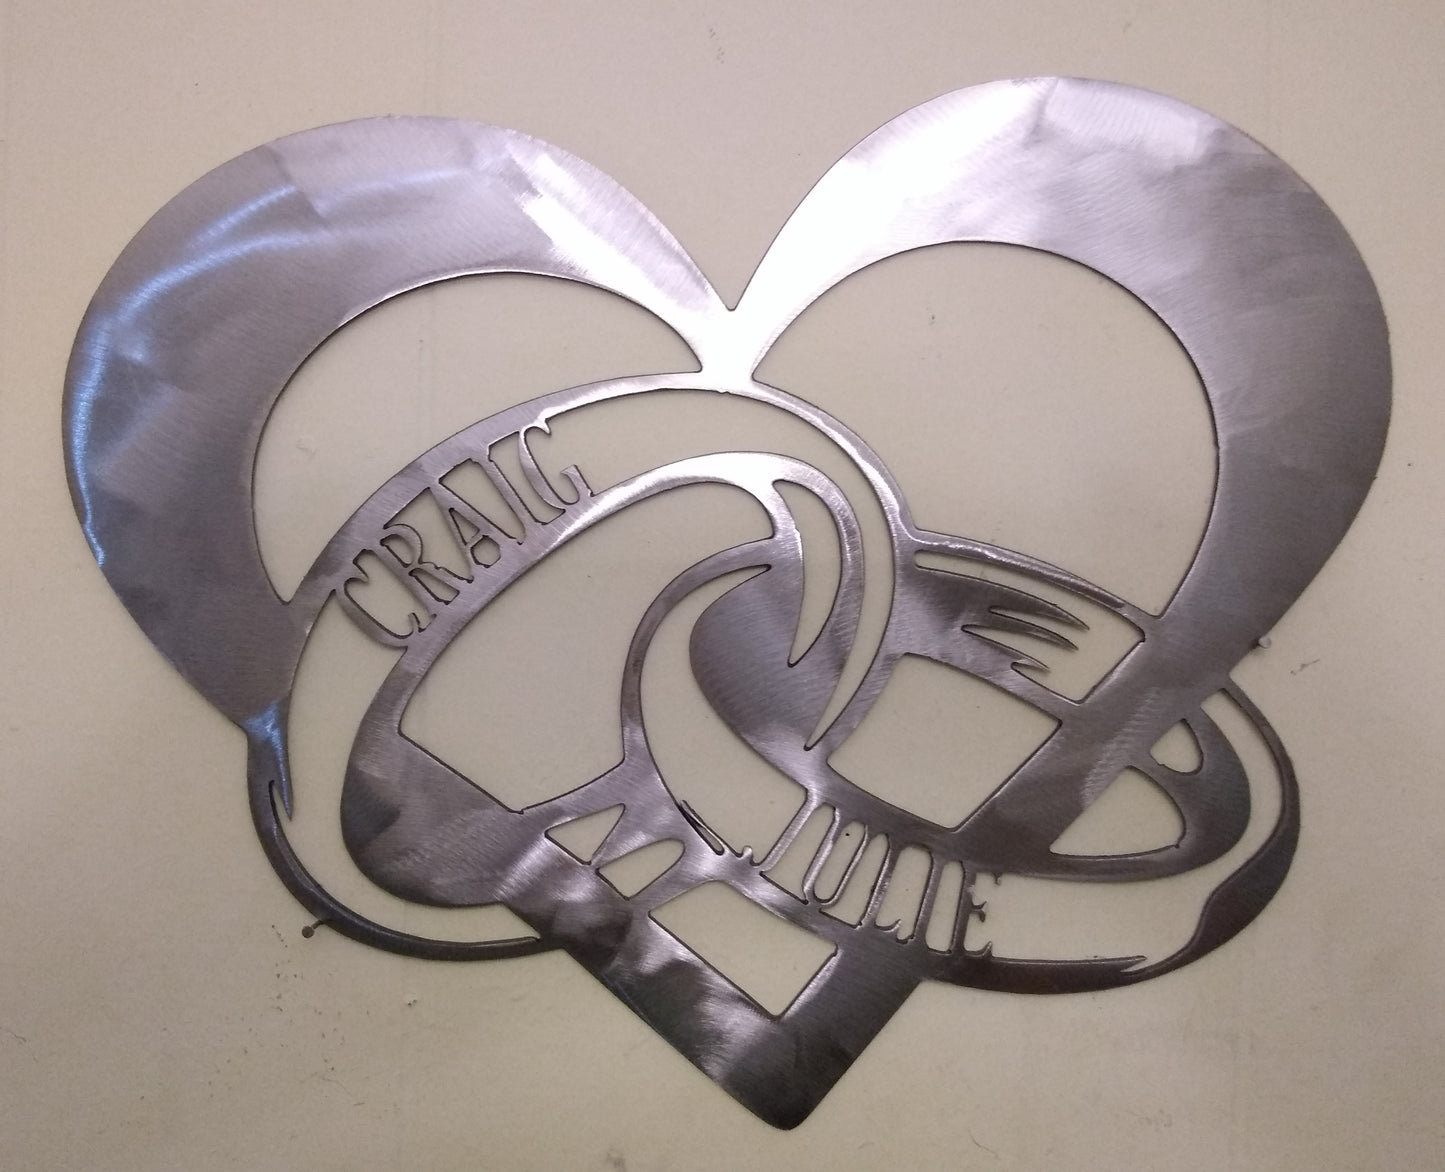 Personalized Heart with Names in Wedding Rings